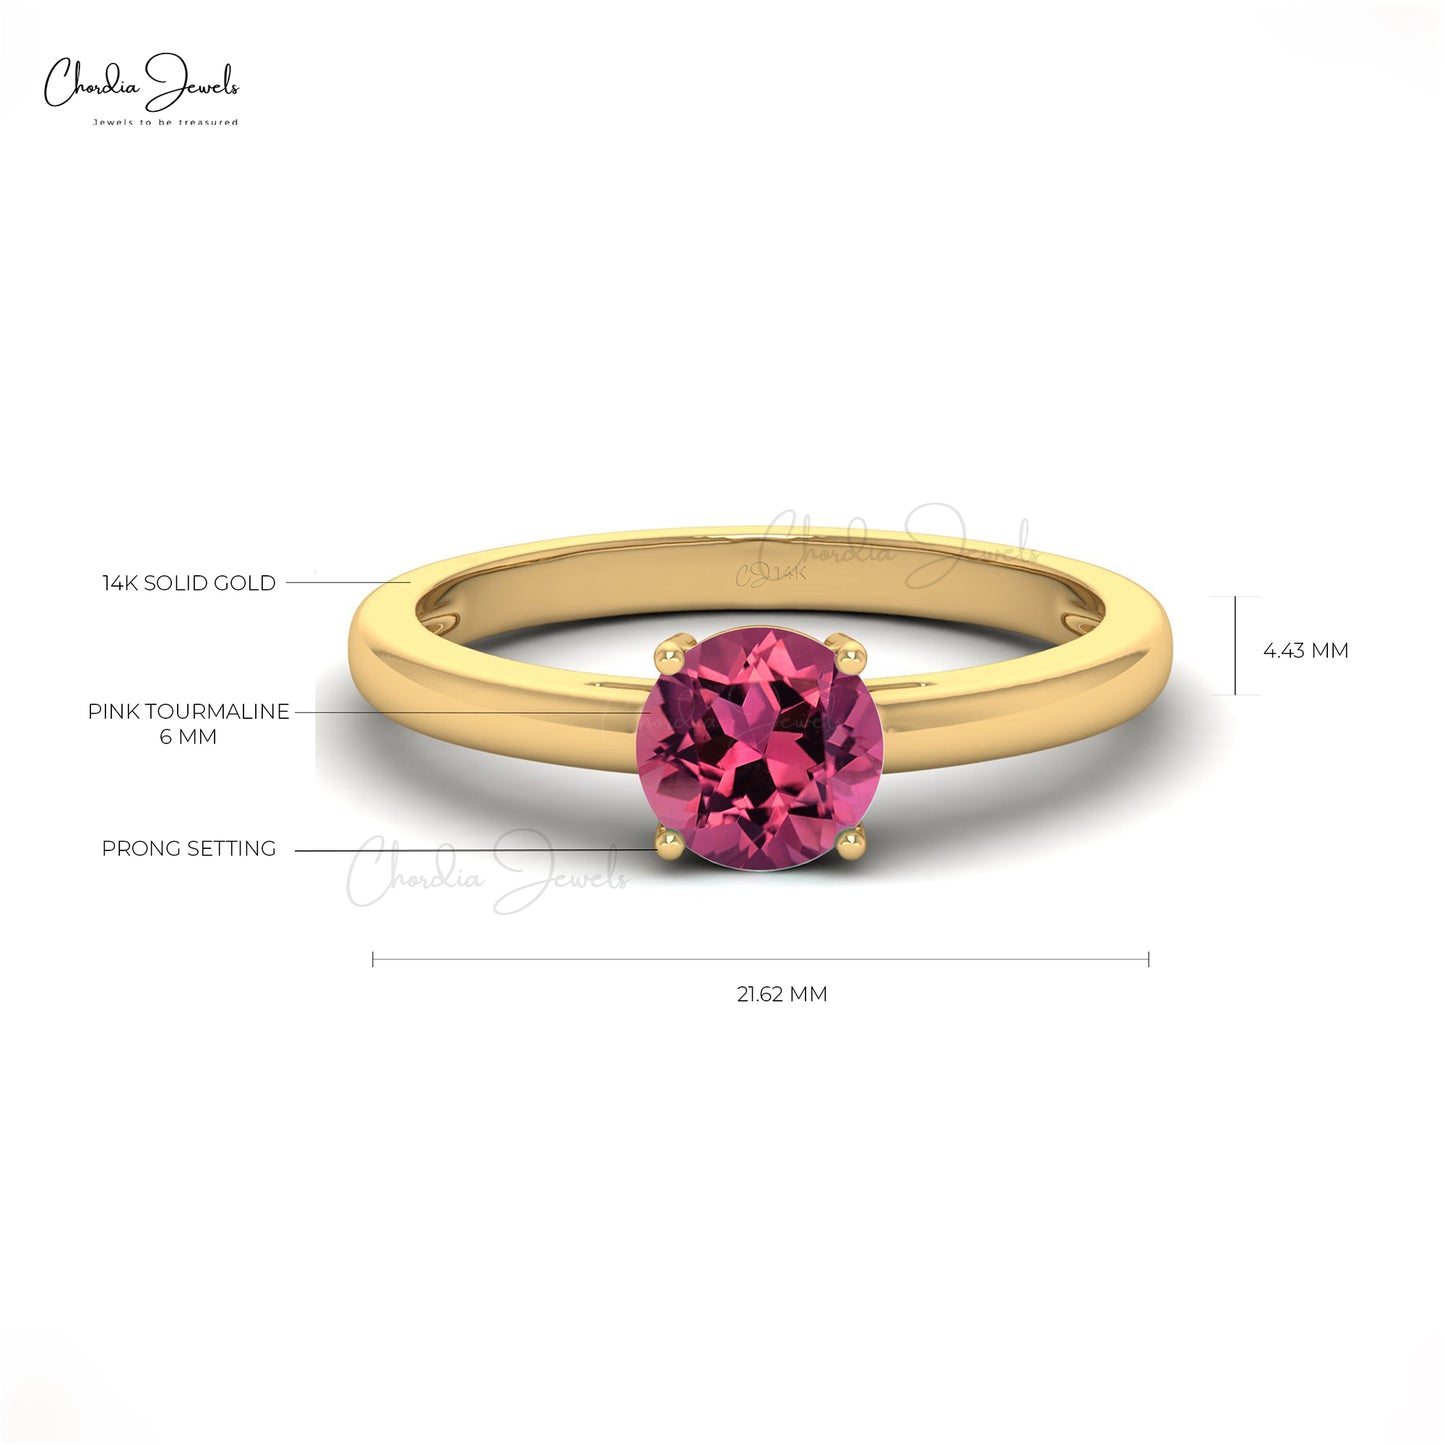 6mm Round Cut Natural Pink Tourmaline Solitaire Ring For Women, 14k Solid Gold Gemstone Ring For Anniversary Gift